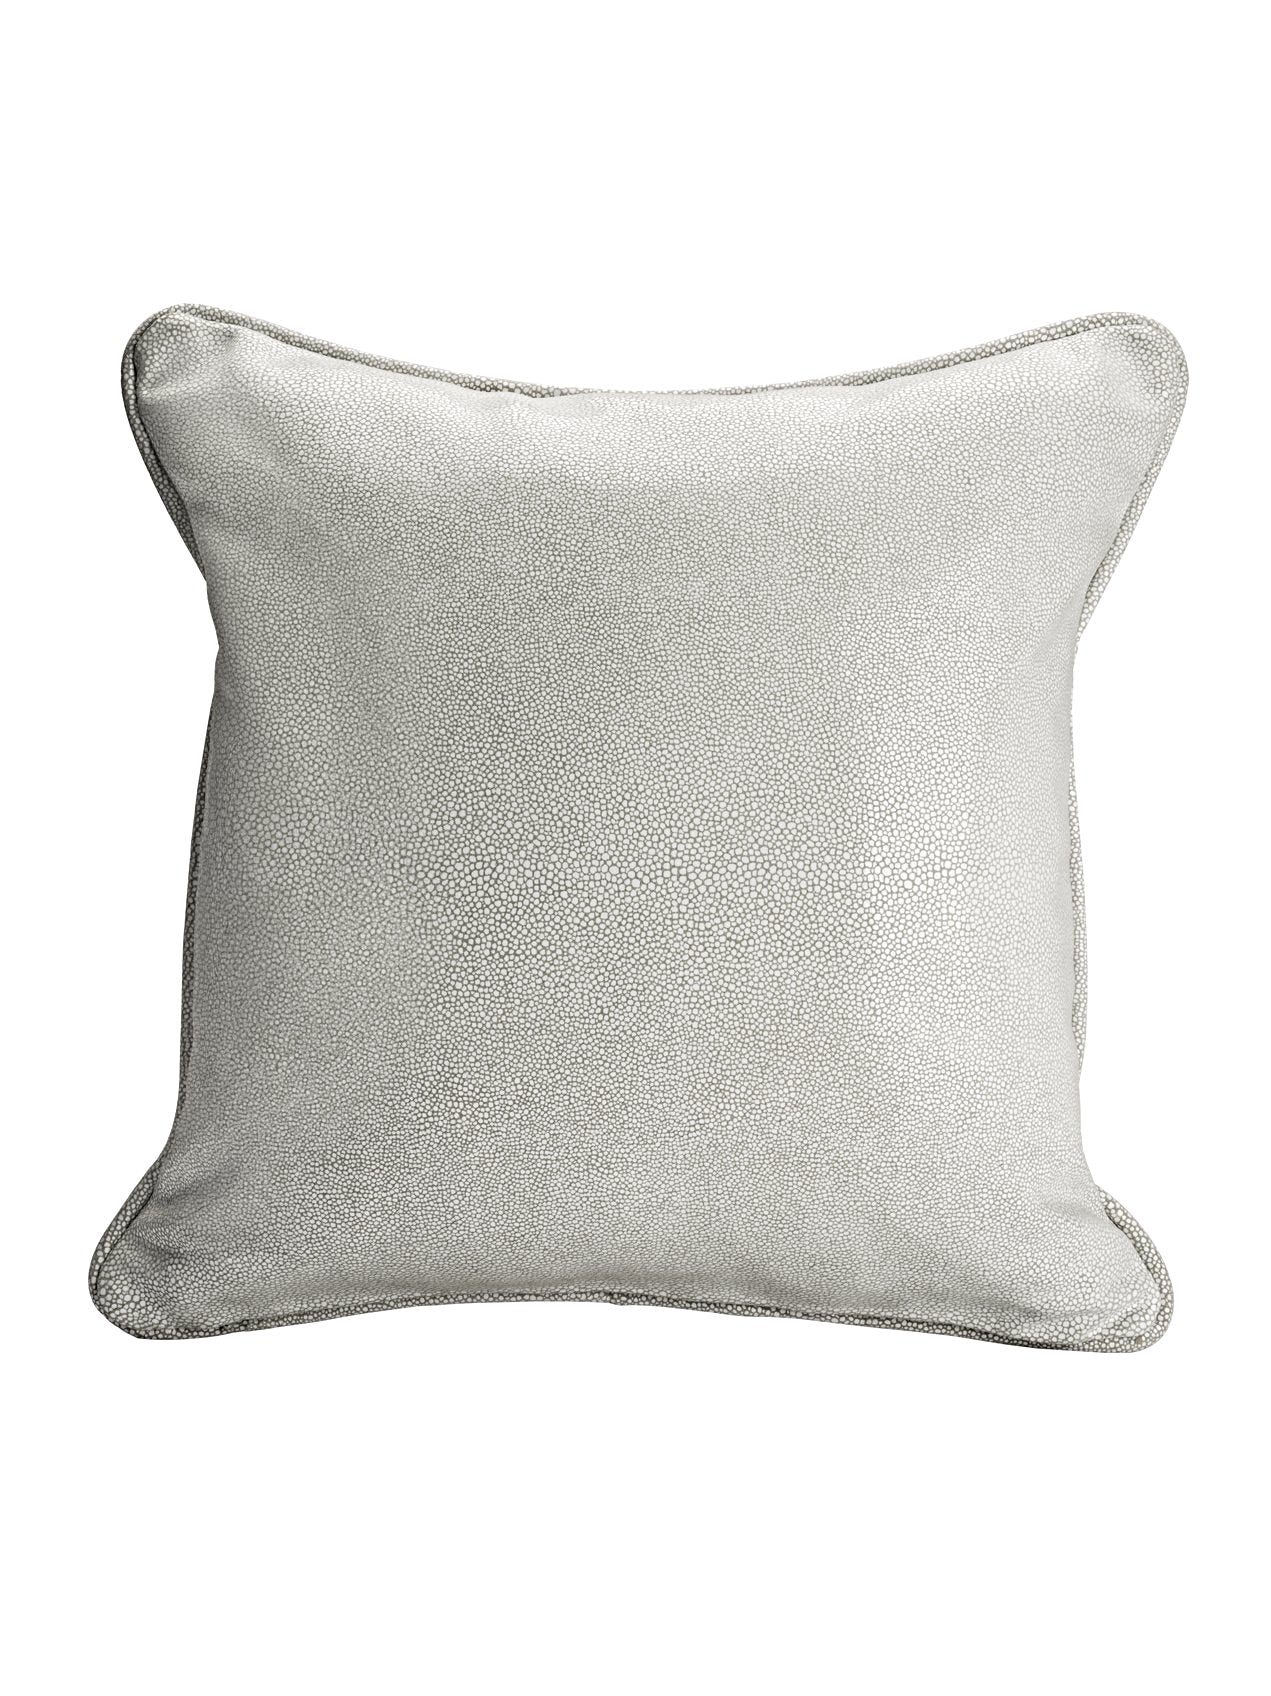 White Galuchat Shagreen Pattern Embossed Suede Cushion One Size Fameed Khalique Ltd